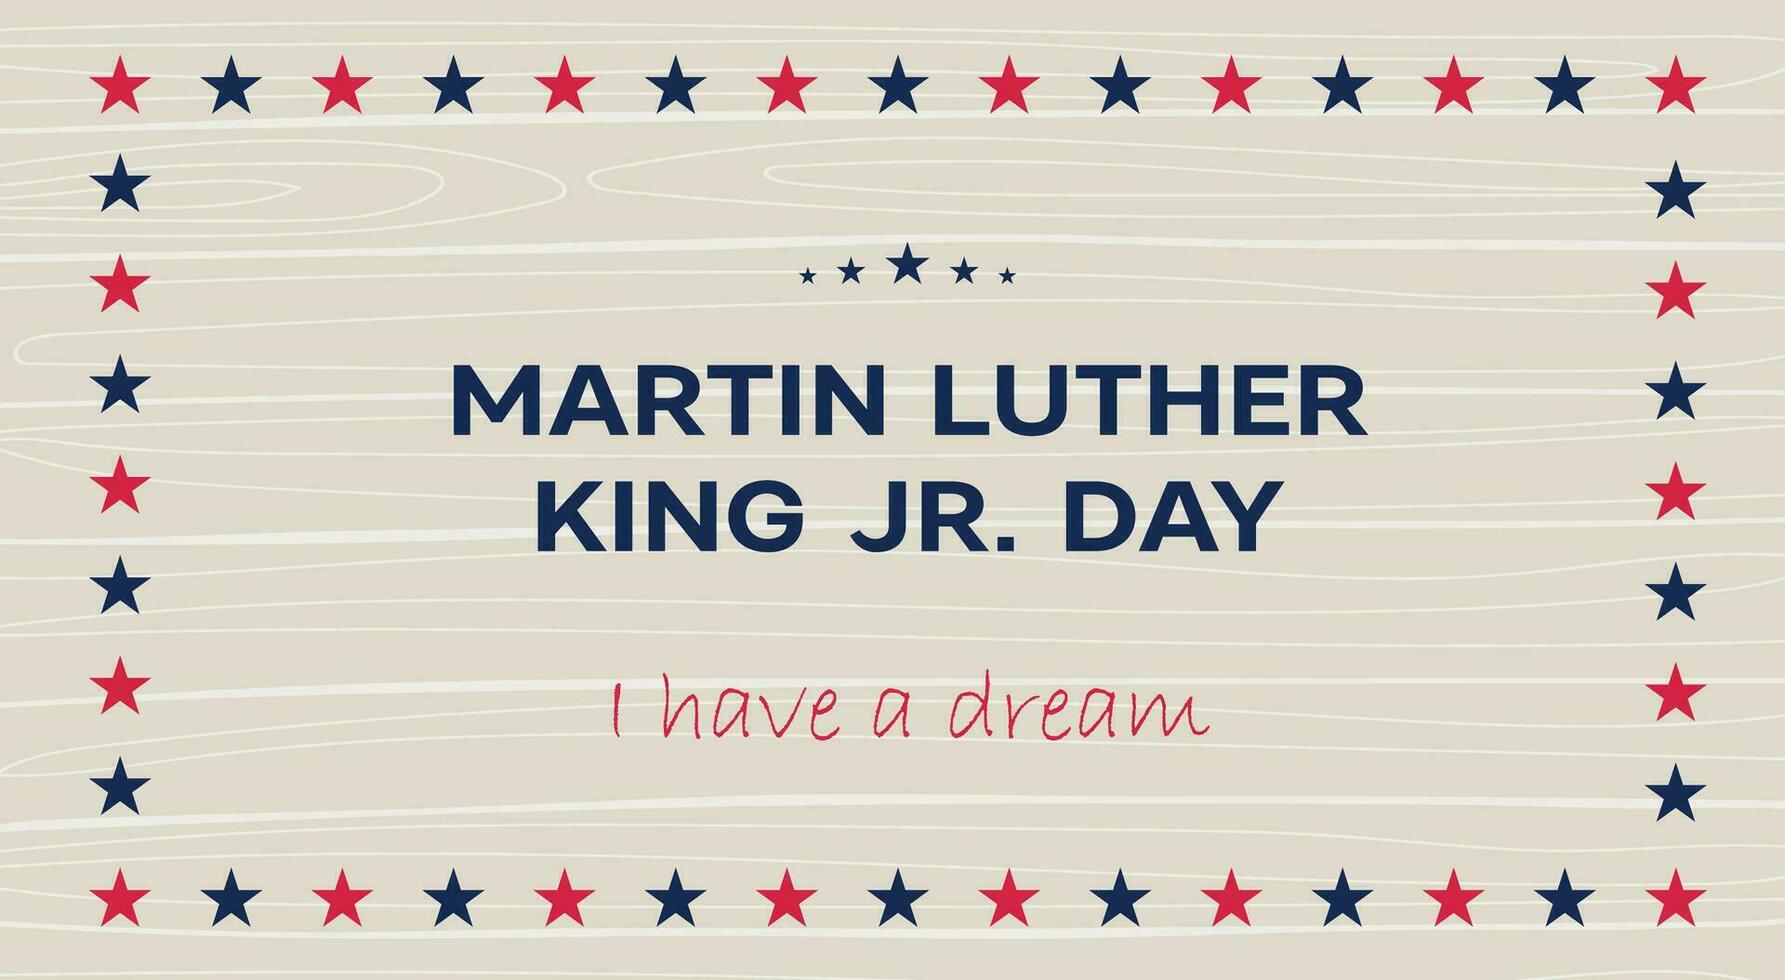 Martin Luther King Jr. Day banner. MLK Day vector wooden background